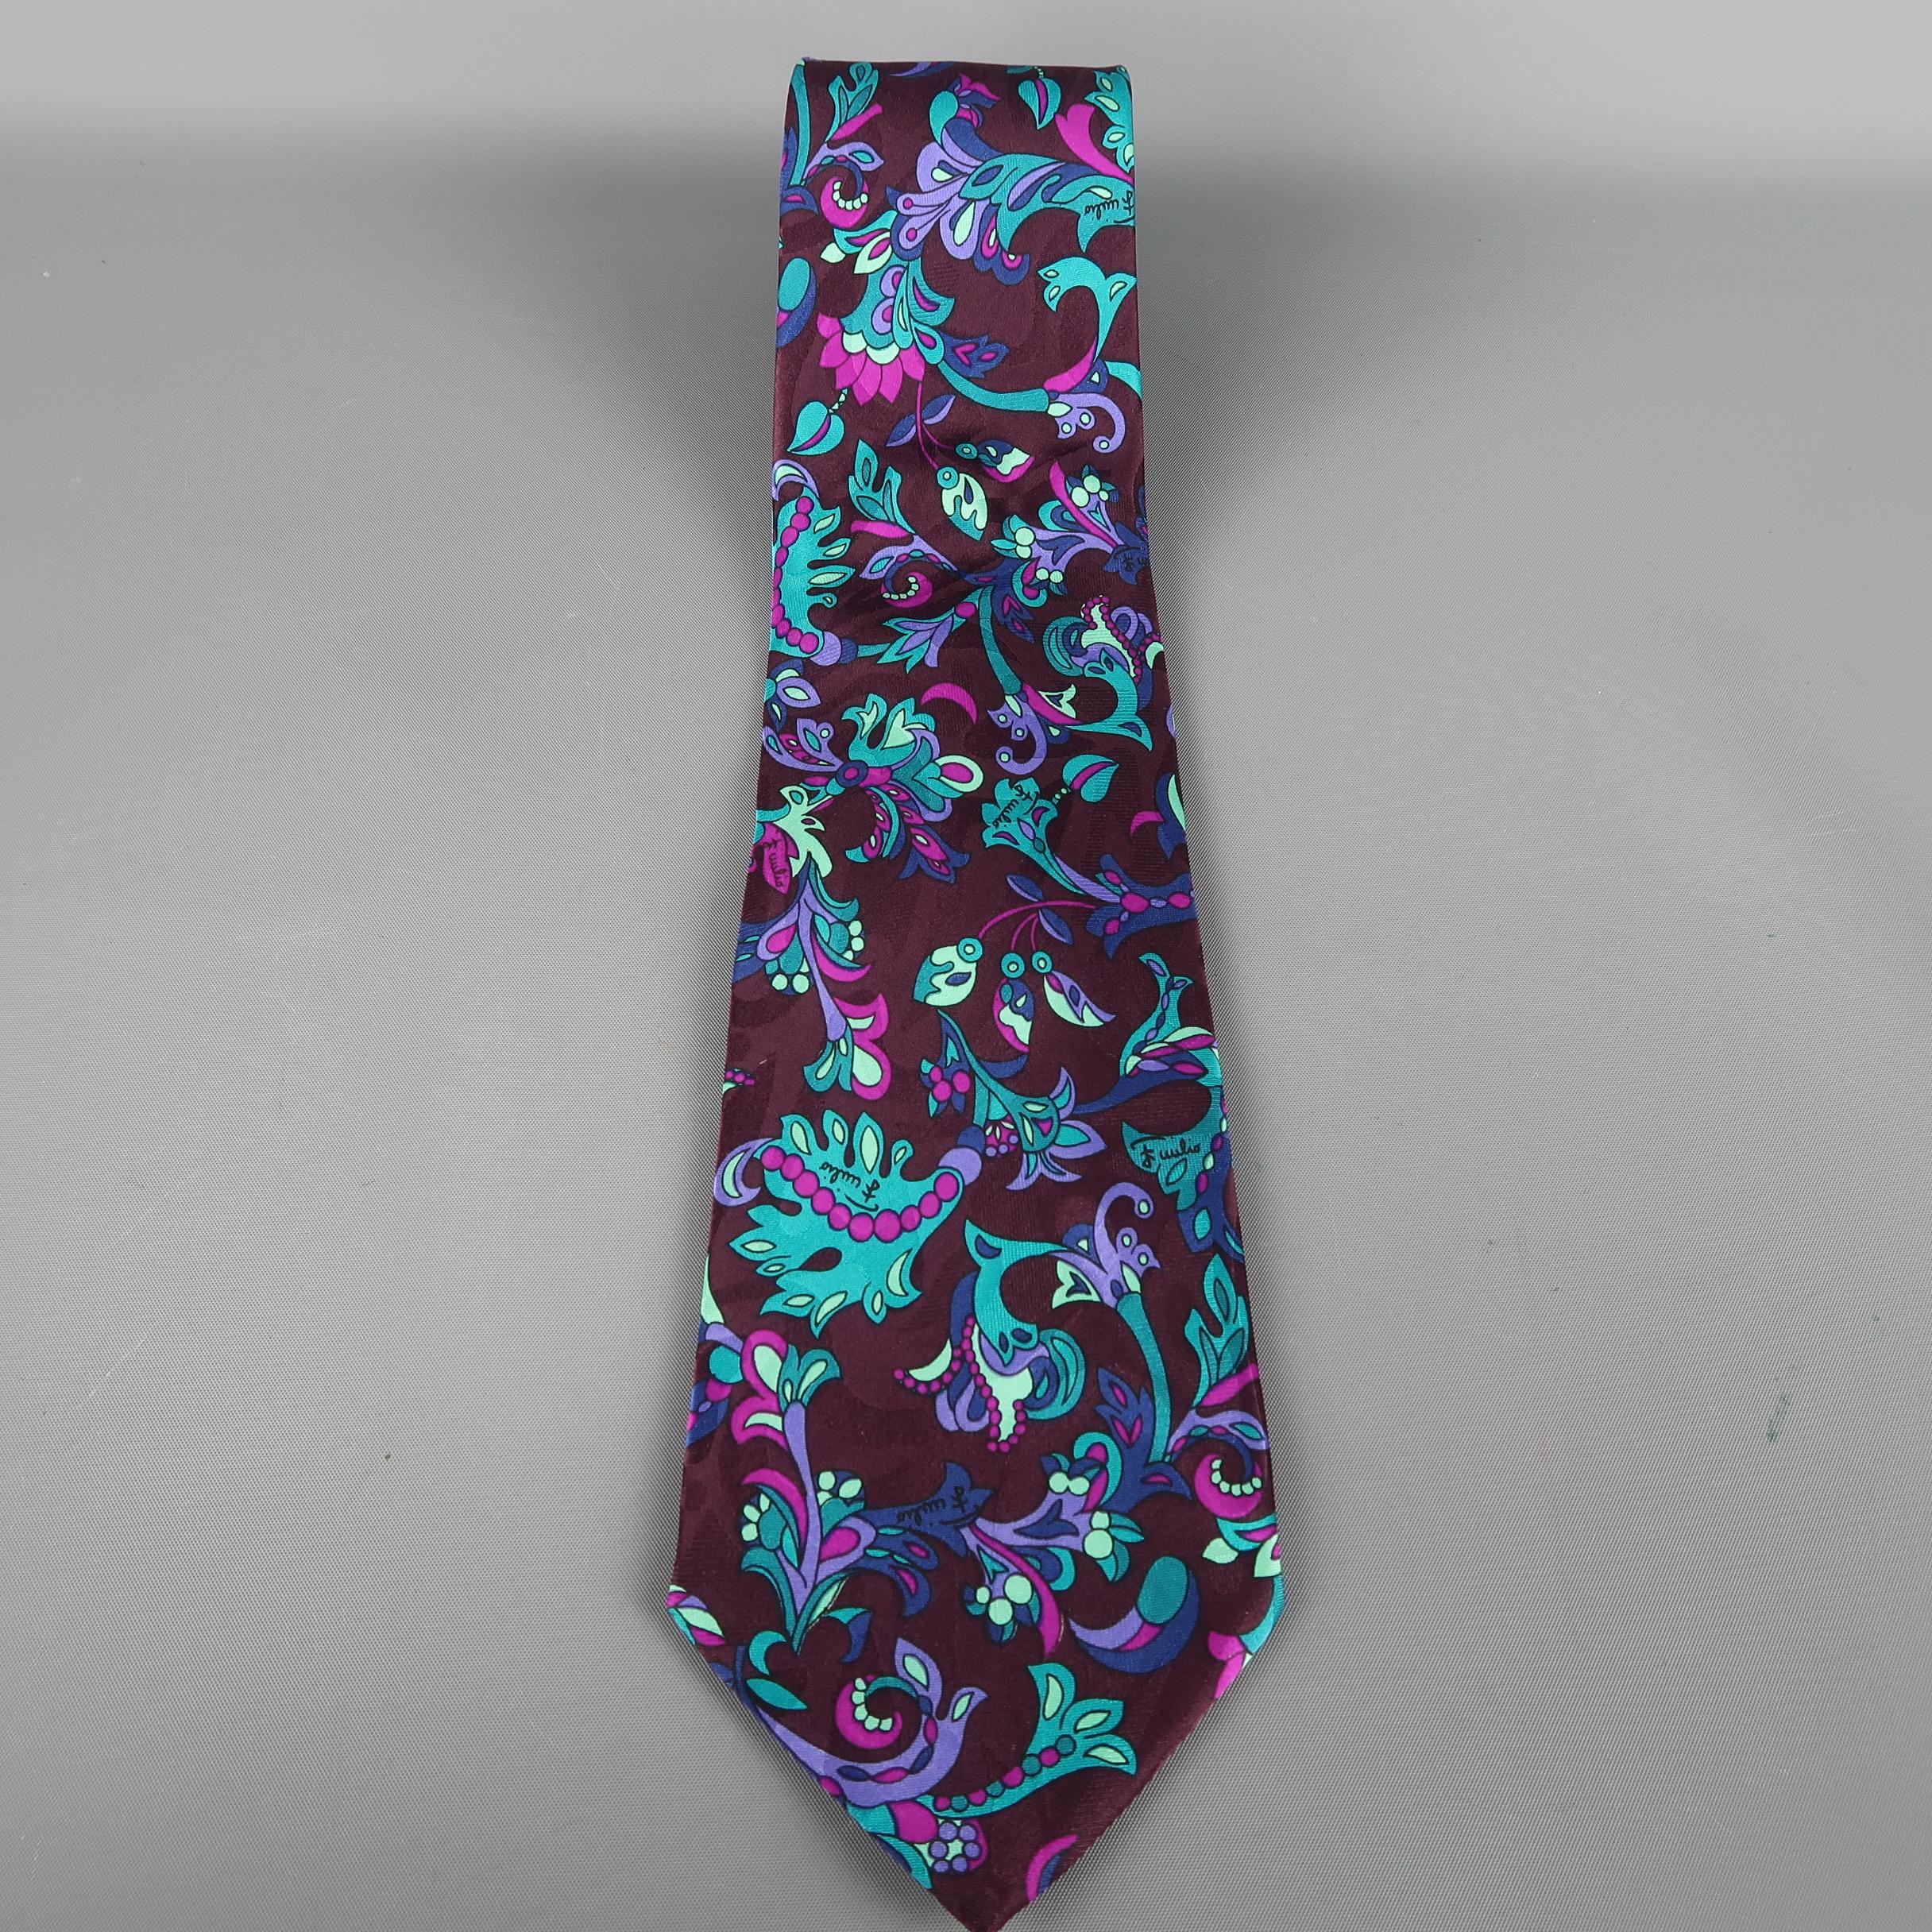 EMILIO PUCCI tie come in brown silk  with an all over colored leaves  print. Made in Italy.
 
Excellent Pre-Owned Condition.
 
Width: 4 in.